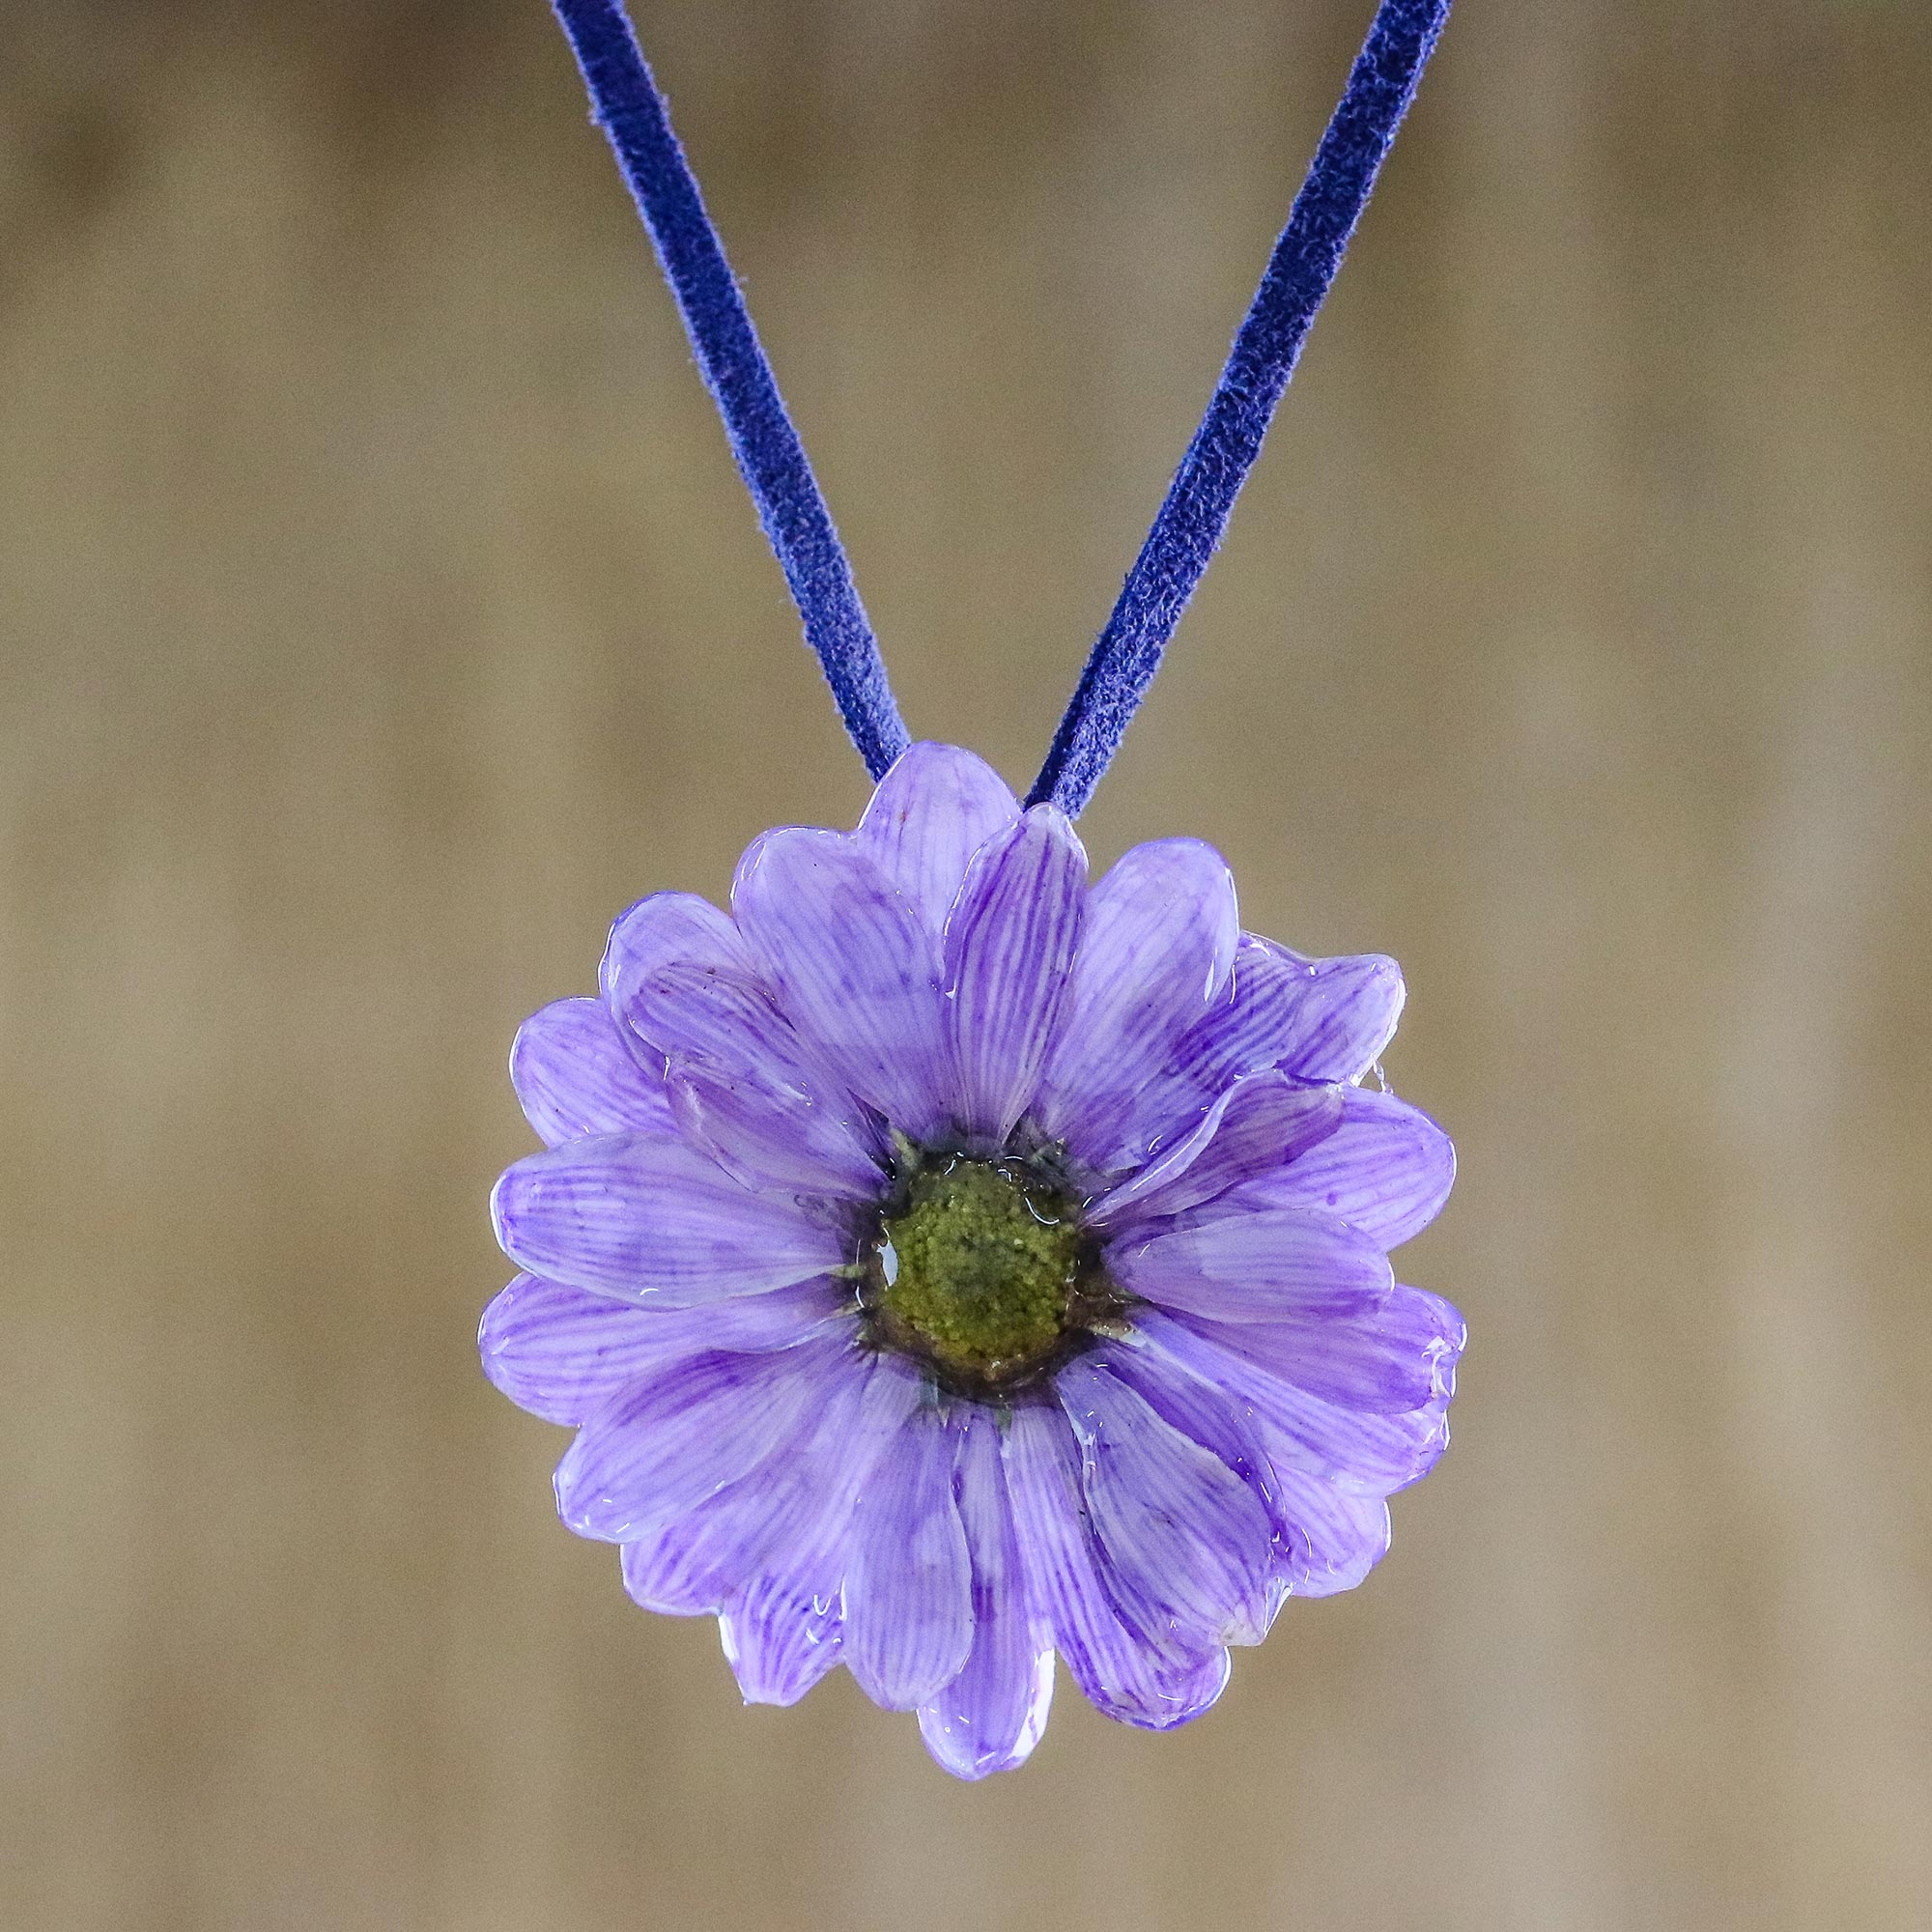 Real Flower Resin Necklace | Fashion Preserved Flower Pendant | Purple | Pink | White Flower Jewerly | New Job Gift, White daisy